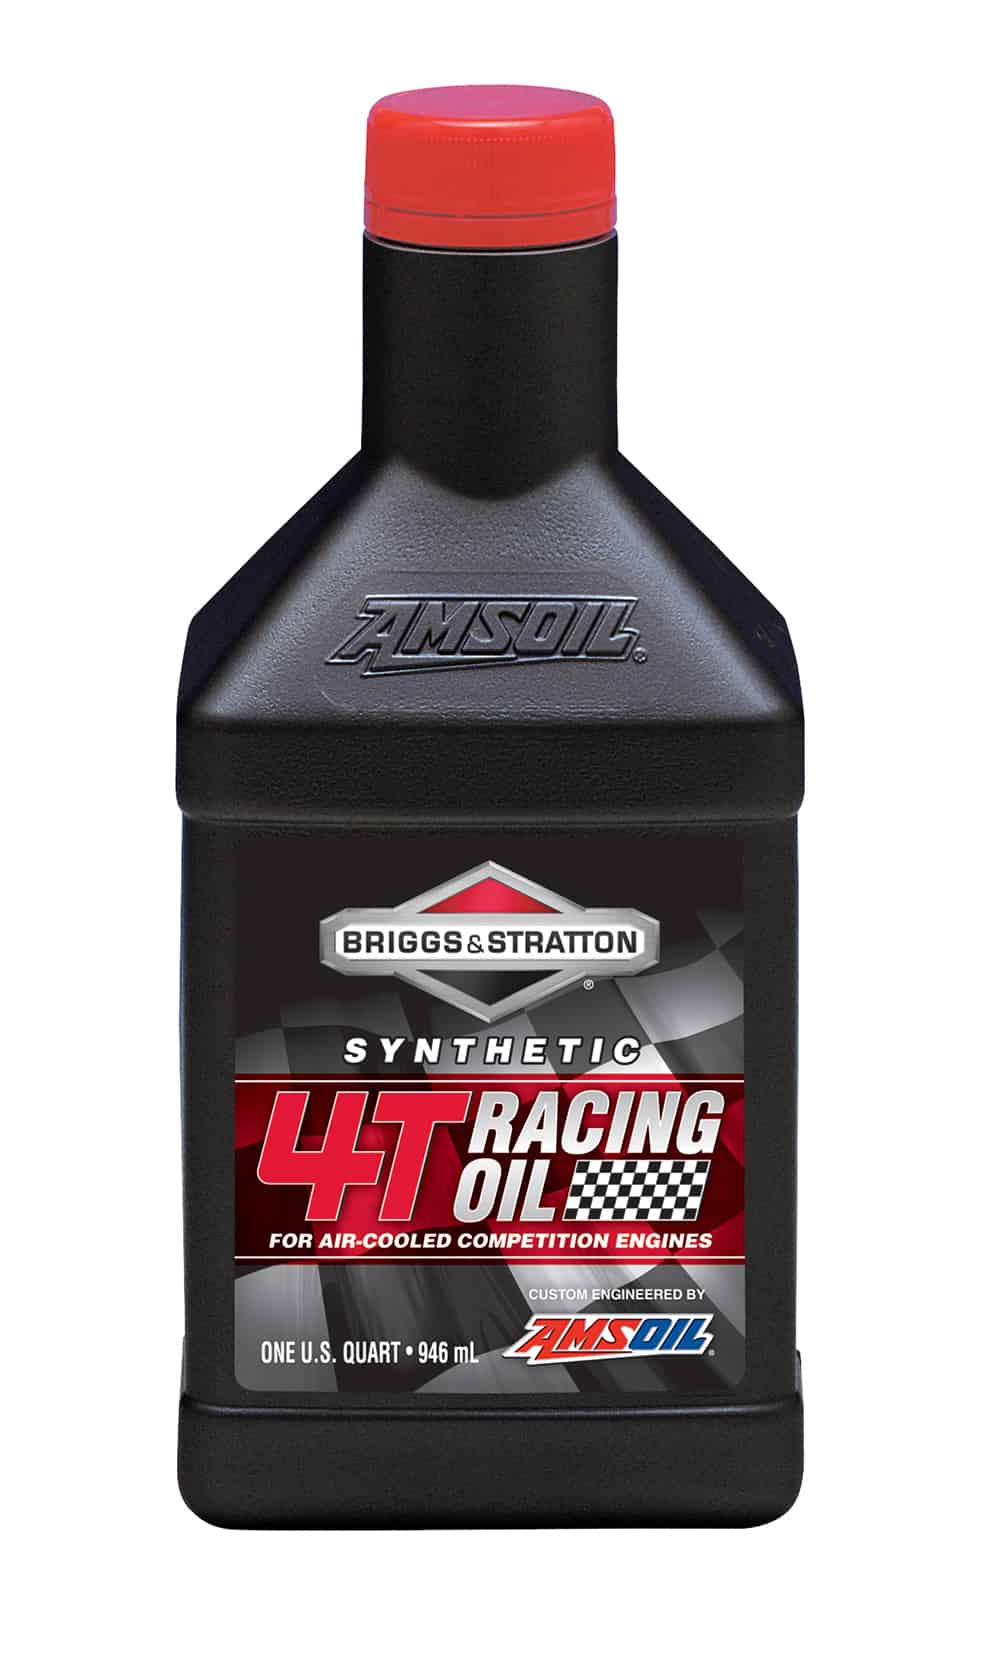 Briggs Stratton Synthetic 4T Racing Oil Quart GBS2960QT